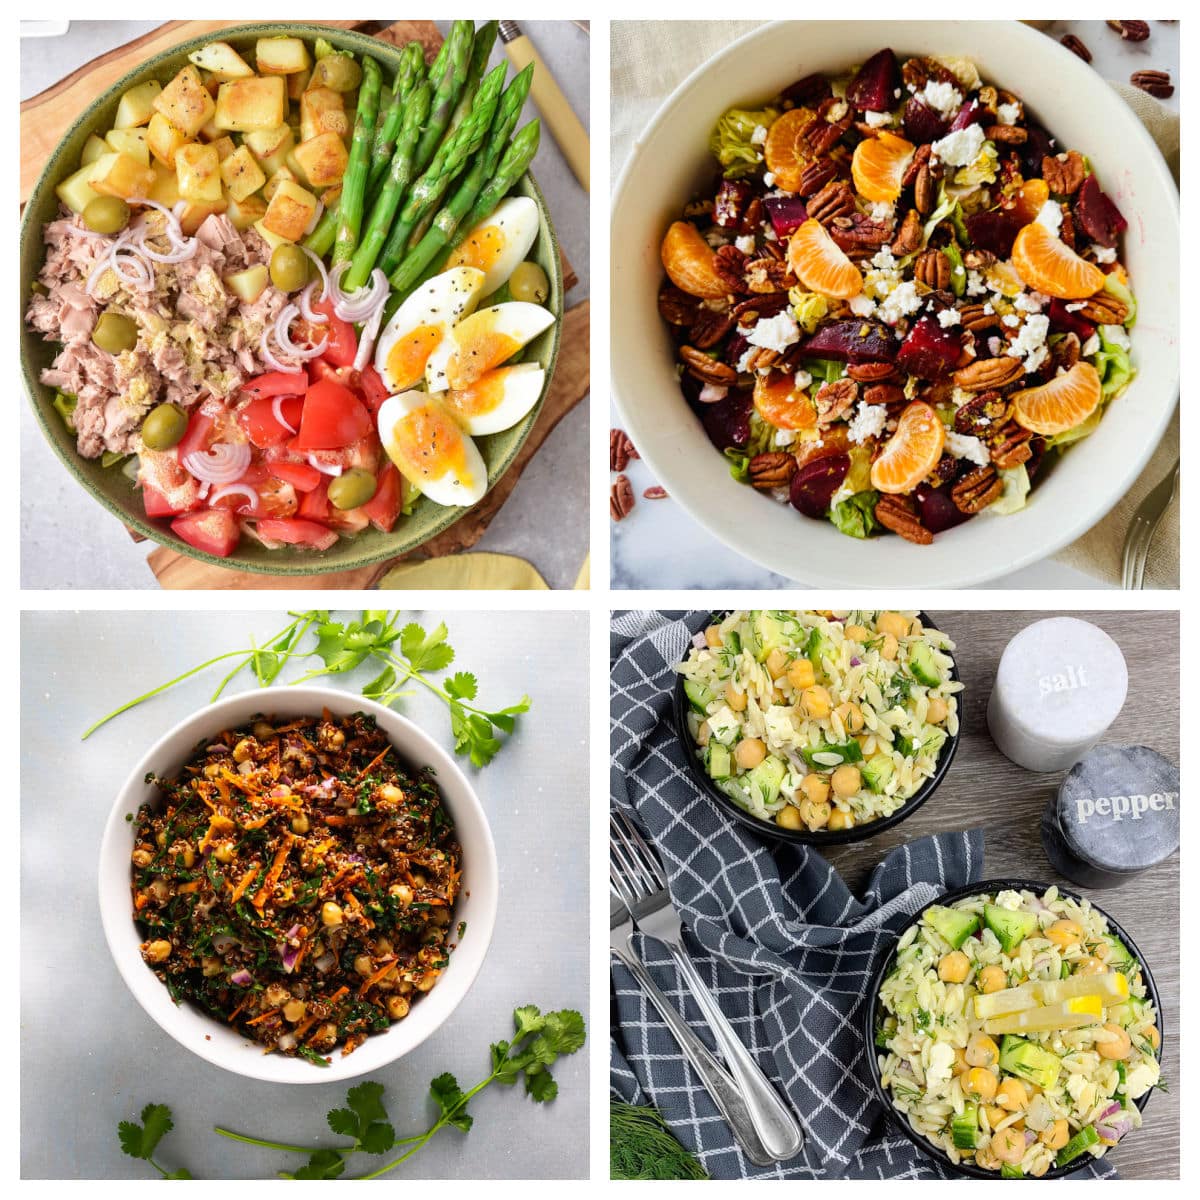 12 Summer Salads Your Family Will Love